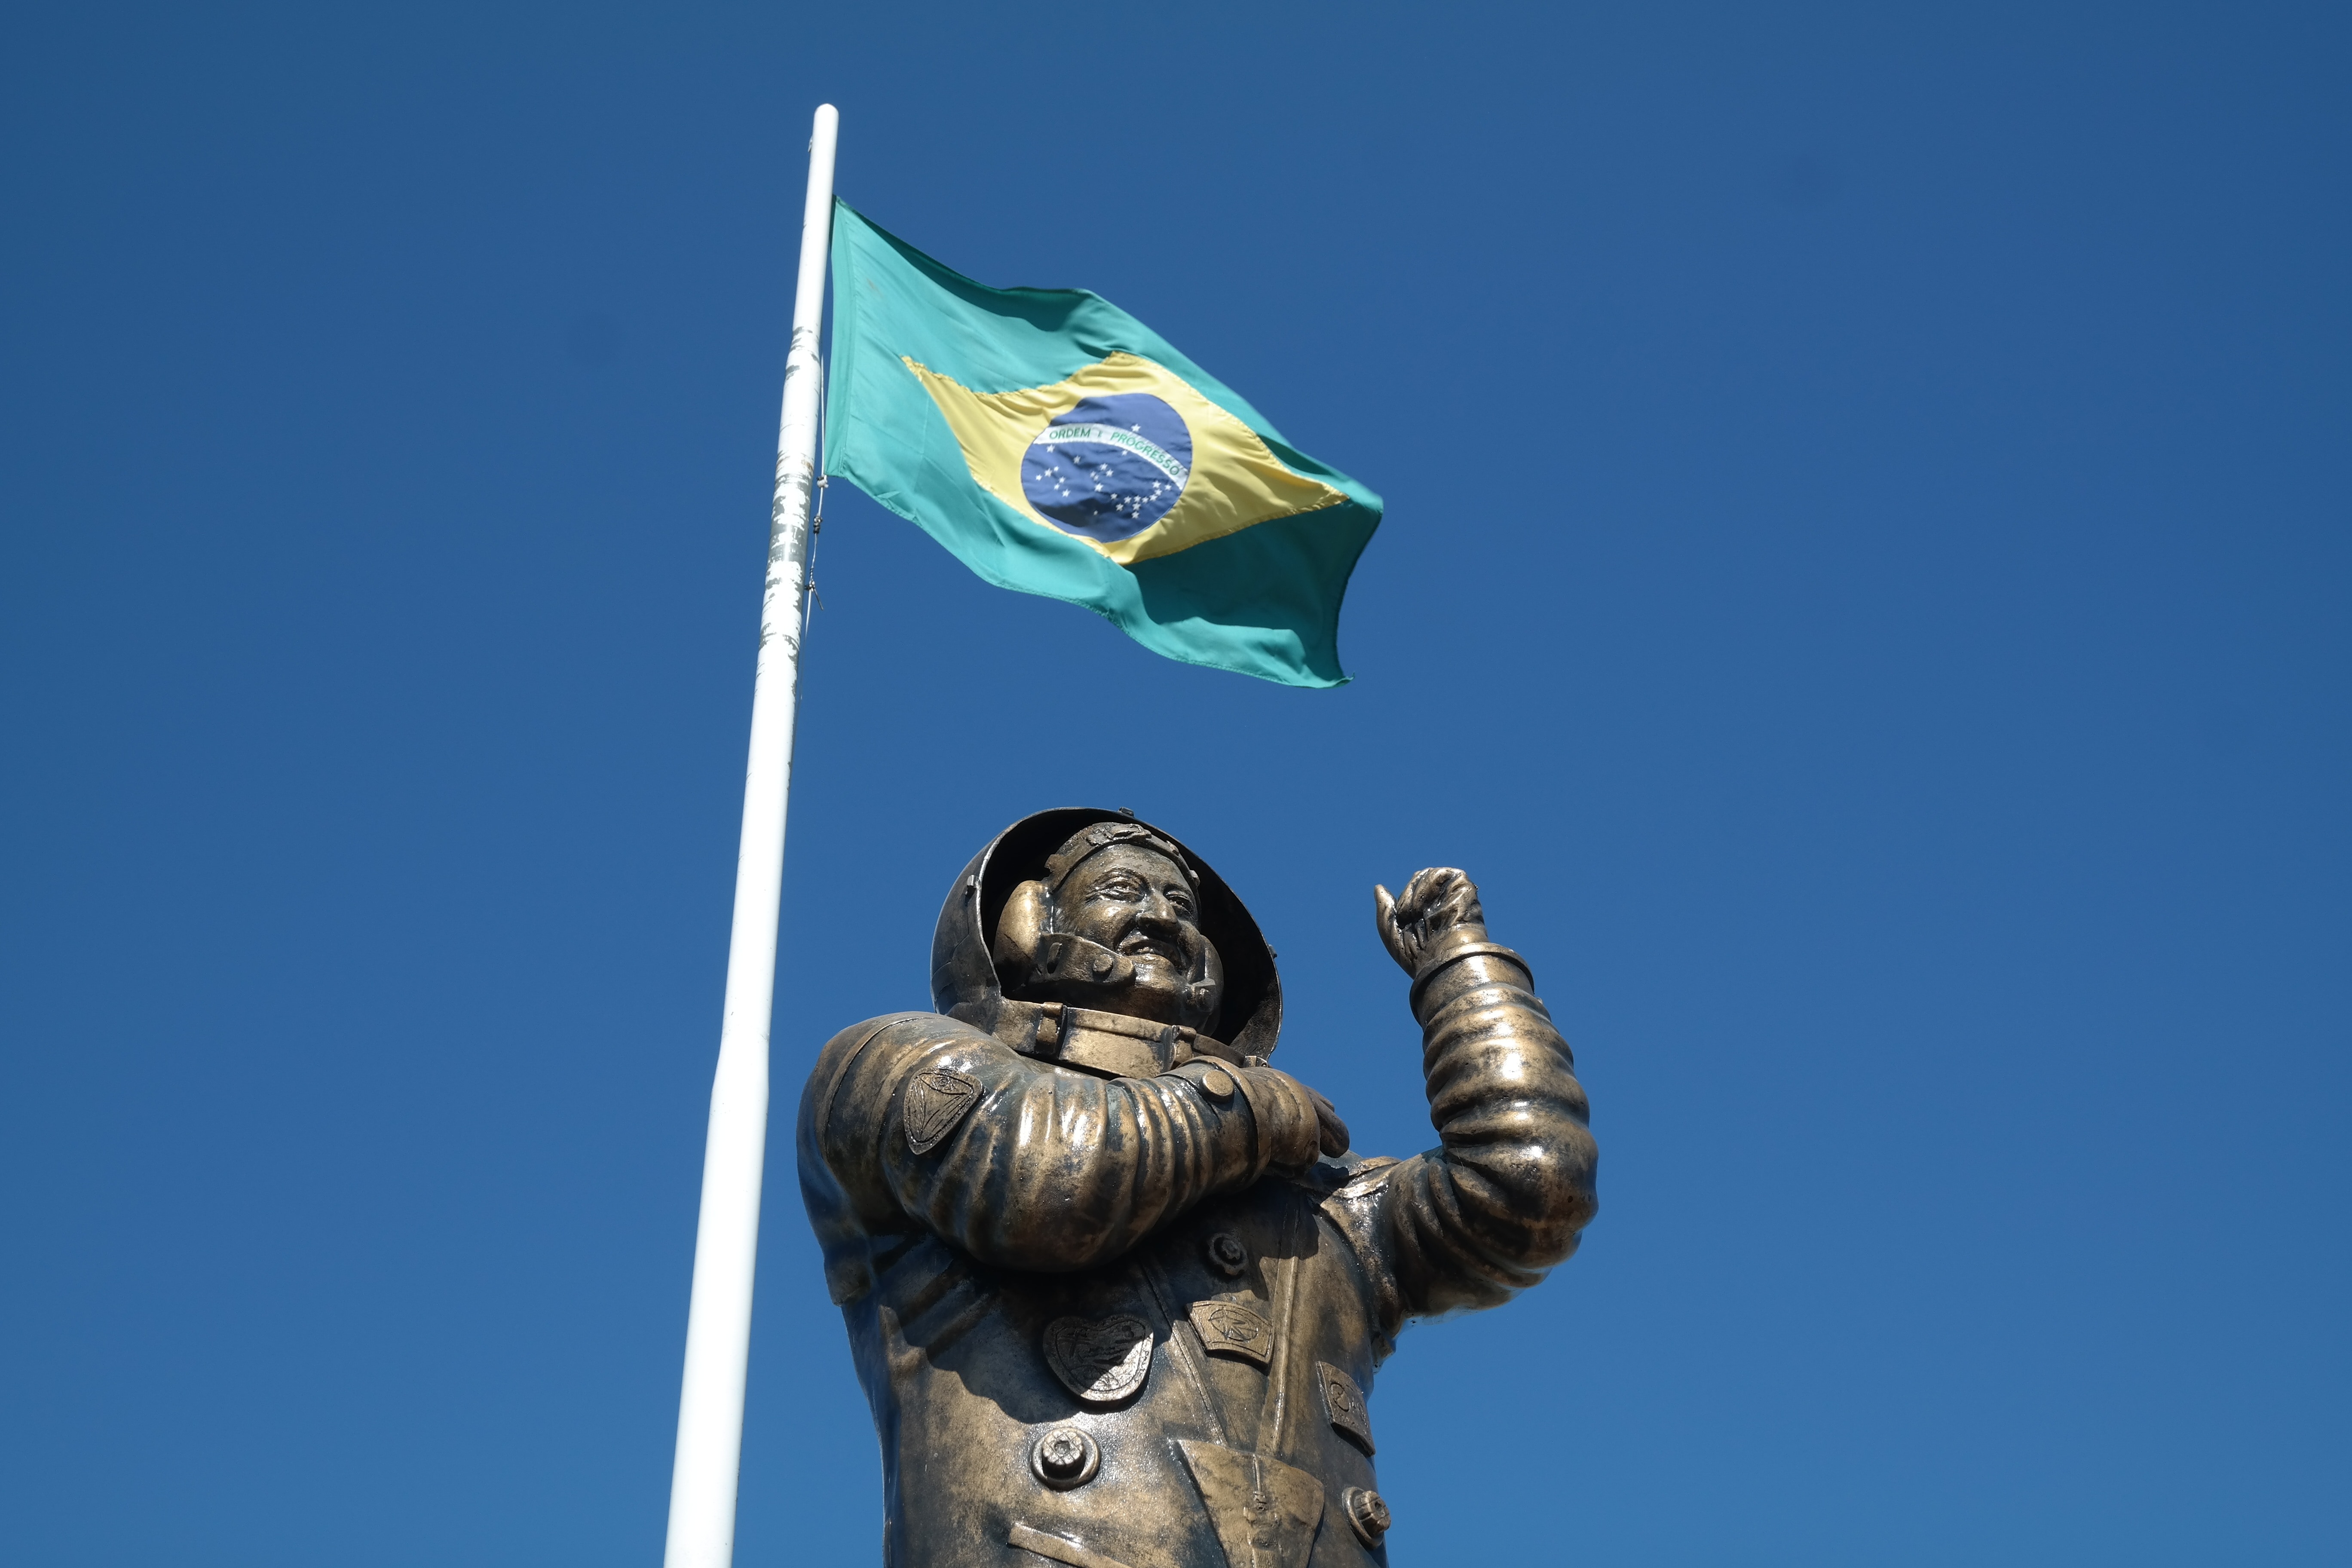 astrounaut statue and brazil flag